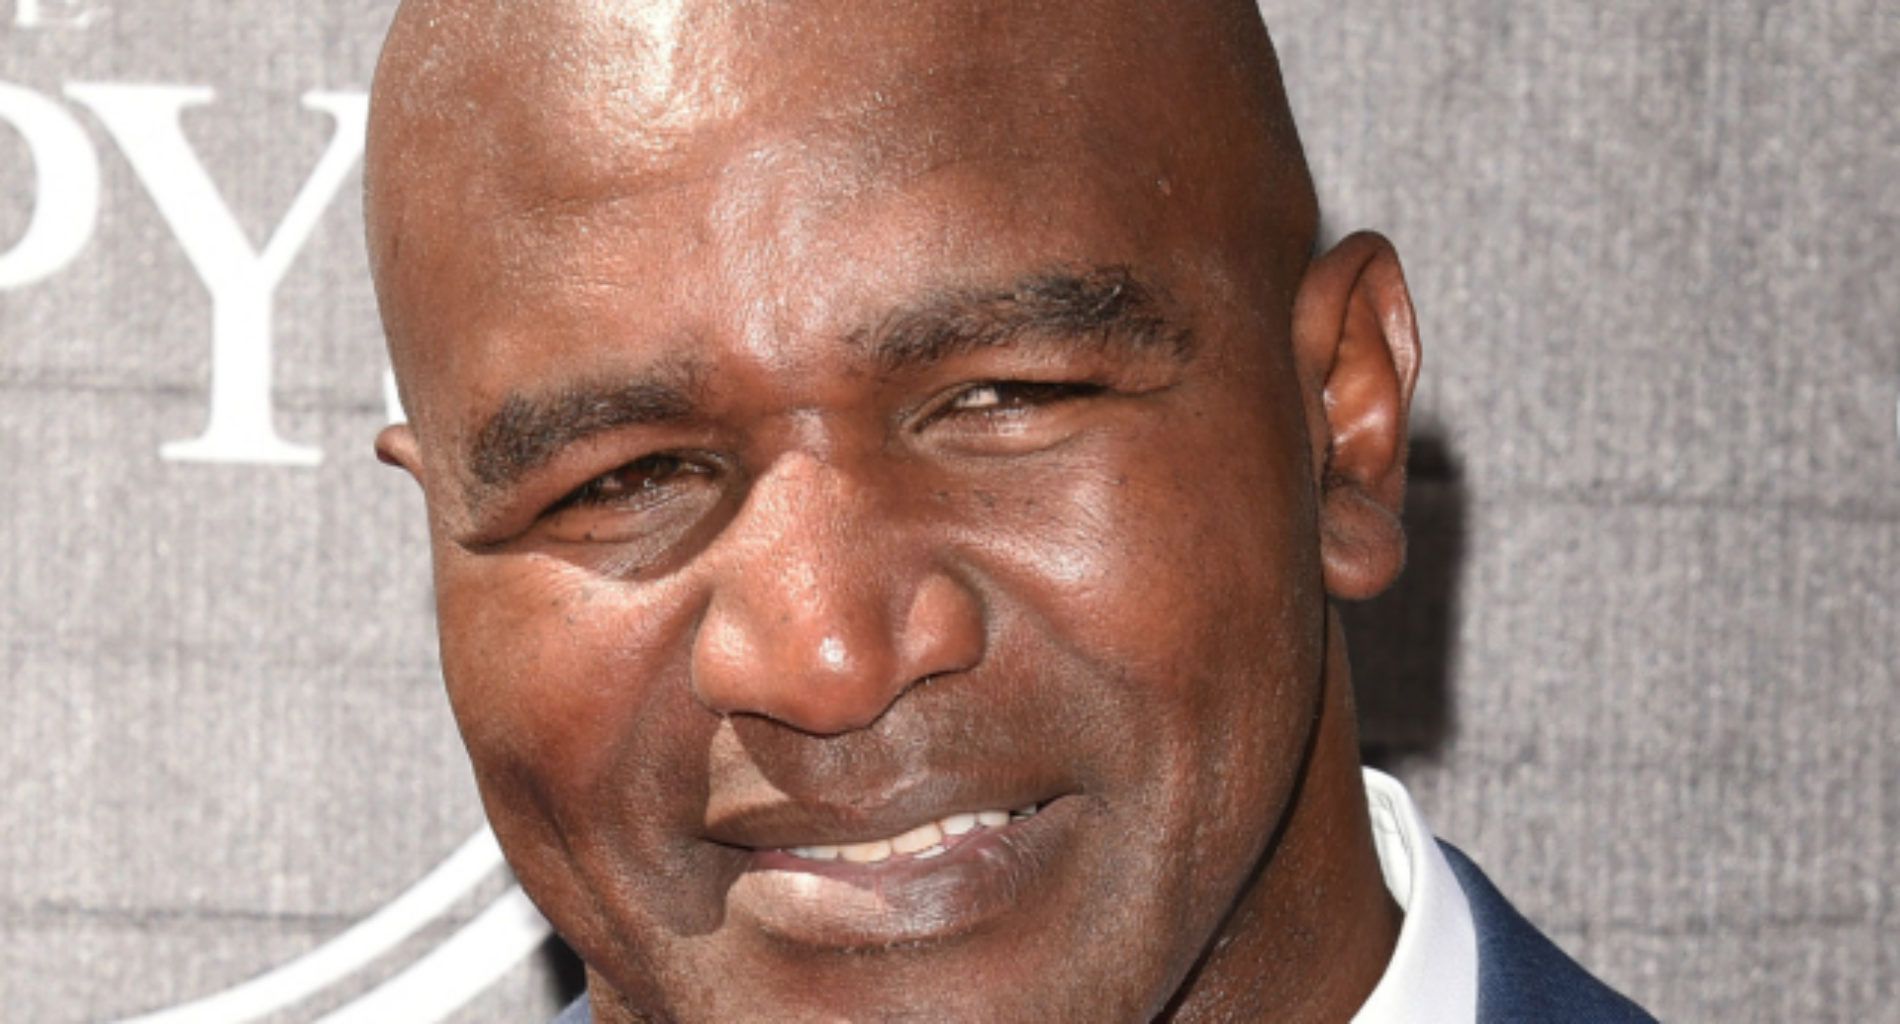 Boxer Evander Holyfield won’t acknowledge Caitlyn Jenner, says she’s still ‘Bruce’